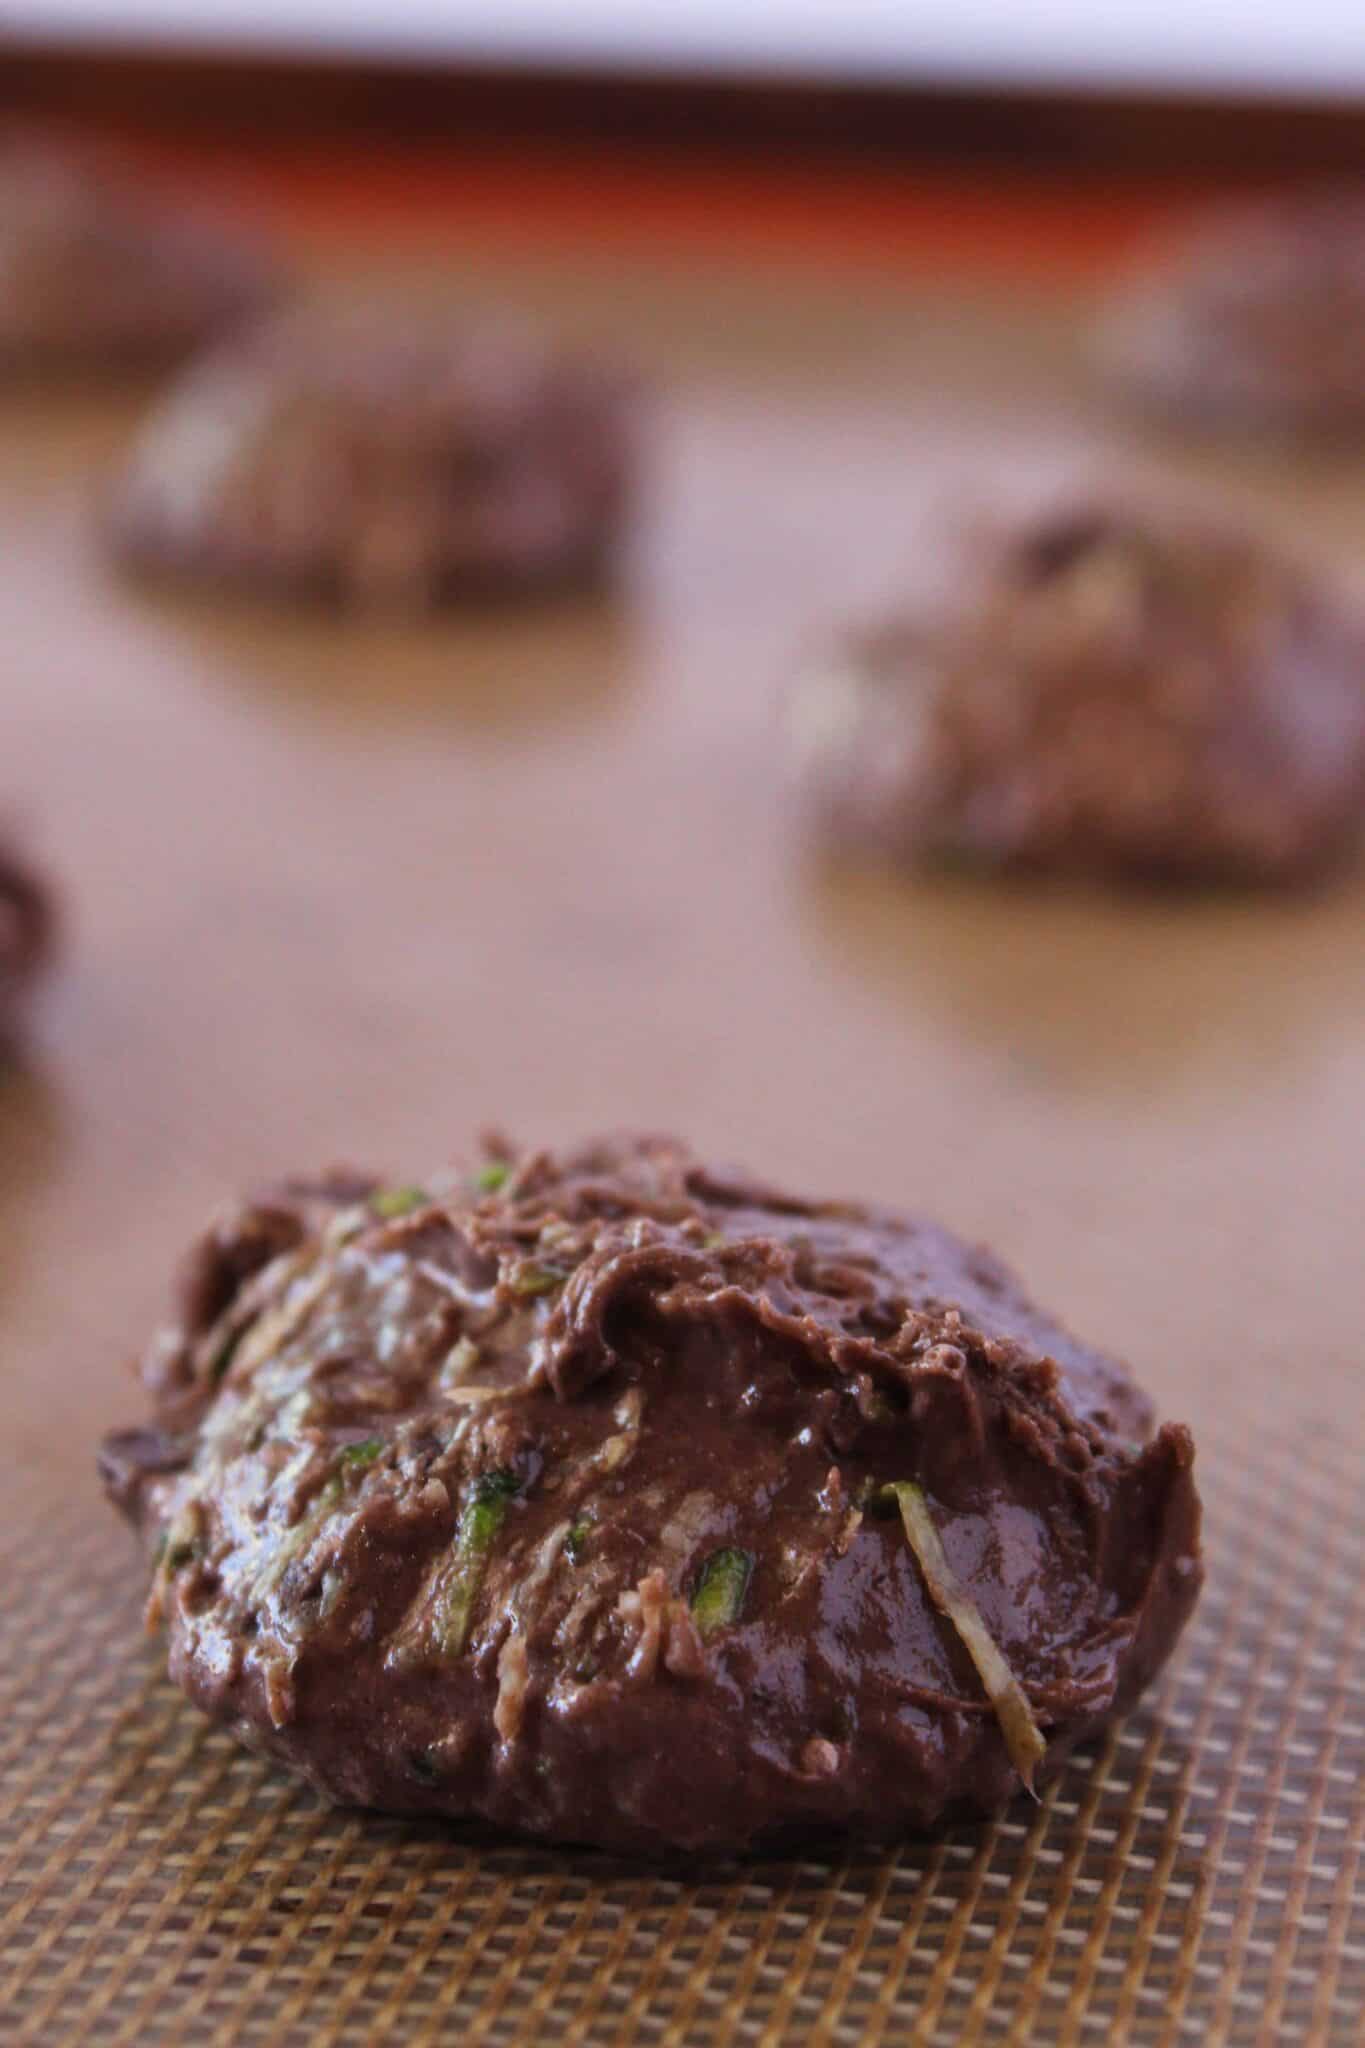 Incredible Chocolate Zucchini Sheet Cake Cookies featured by top US cookies blogger, Practically Homemade